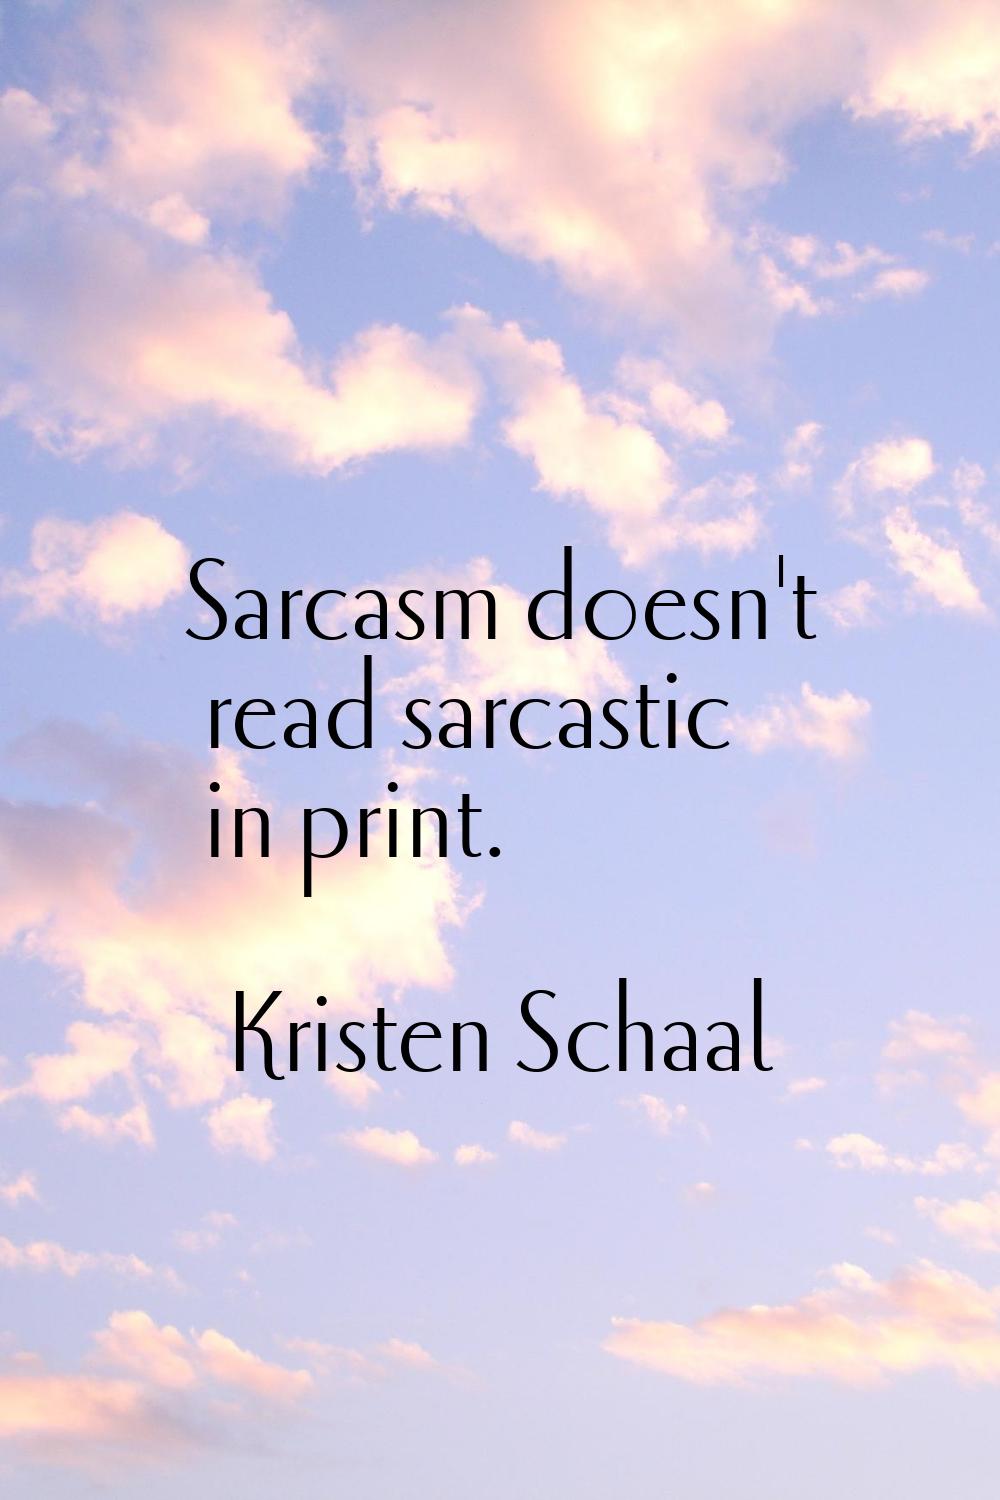 Sarcasm doesn't read sarcastic in print.